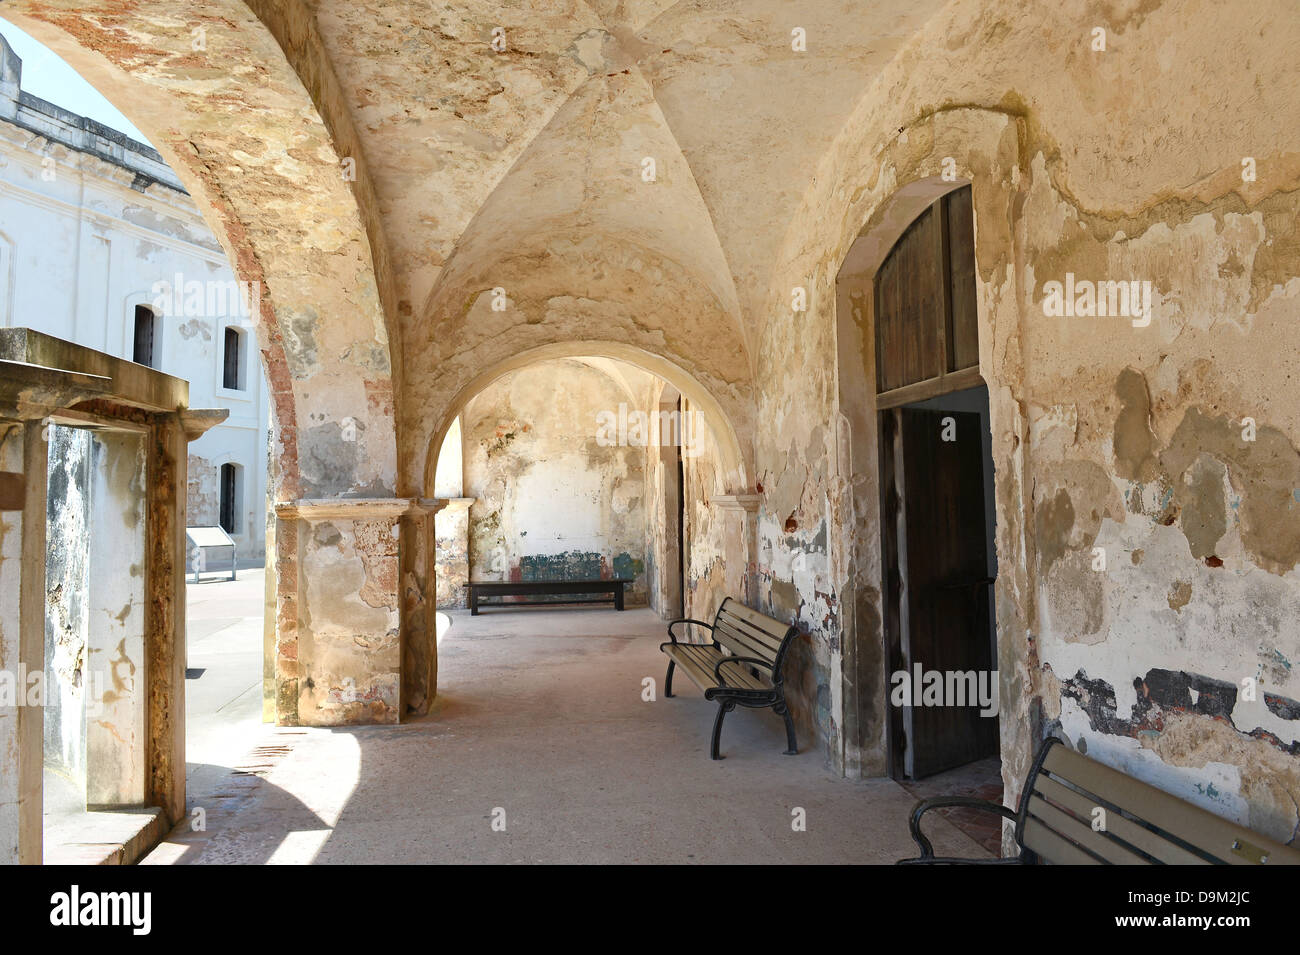 Hallway with arches at Castillo San Cristobal fort in San Juan, Puerto Rico Stock Photo